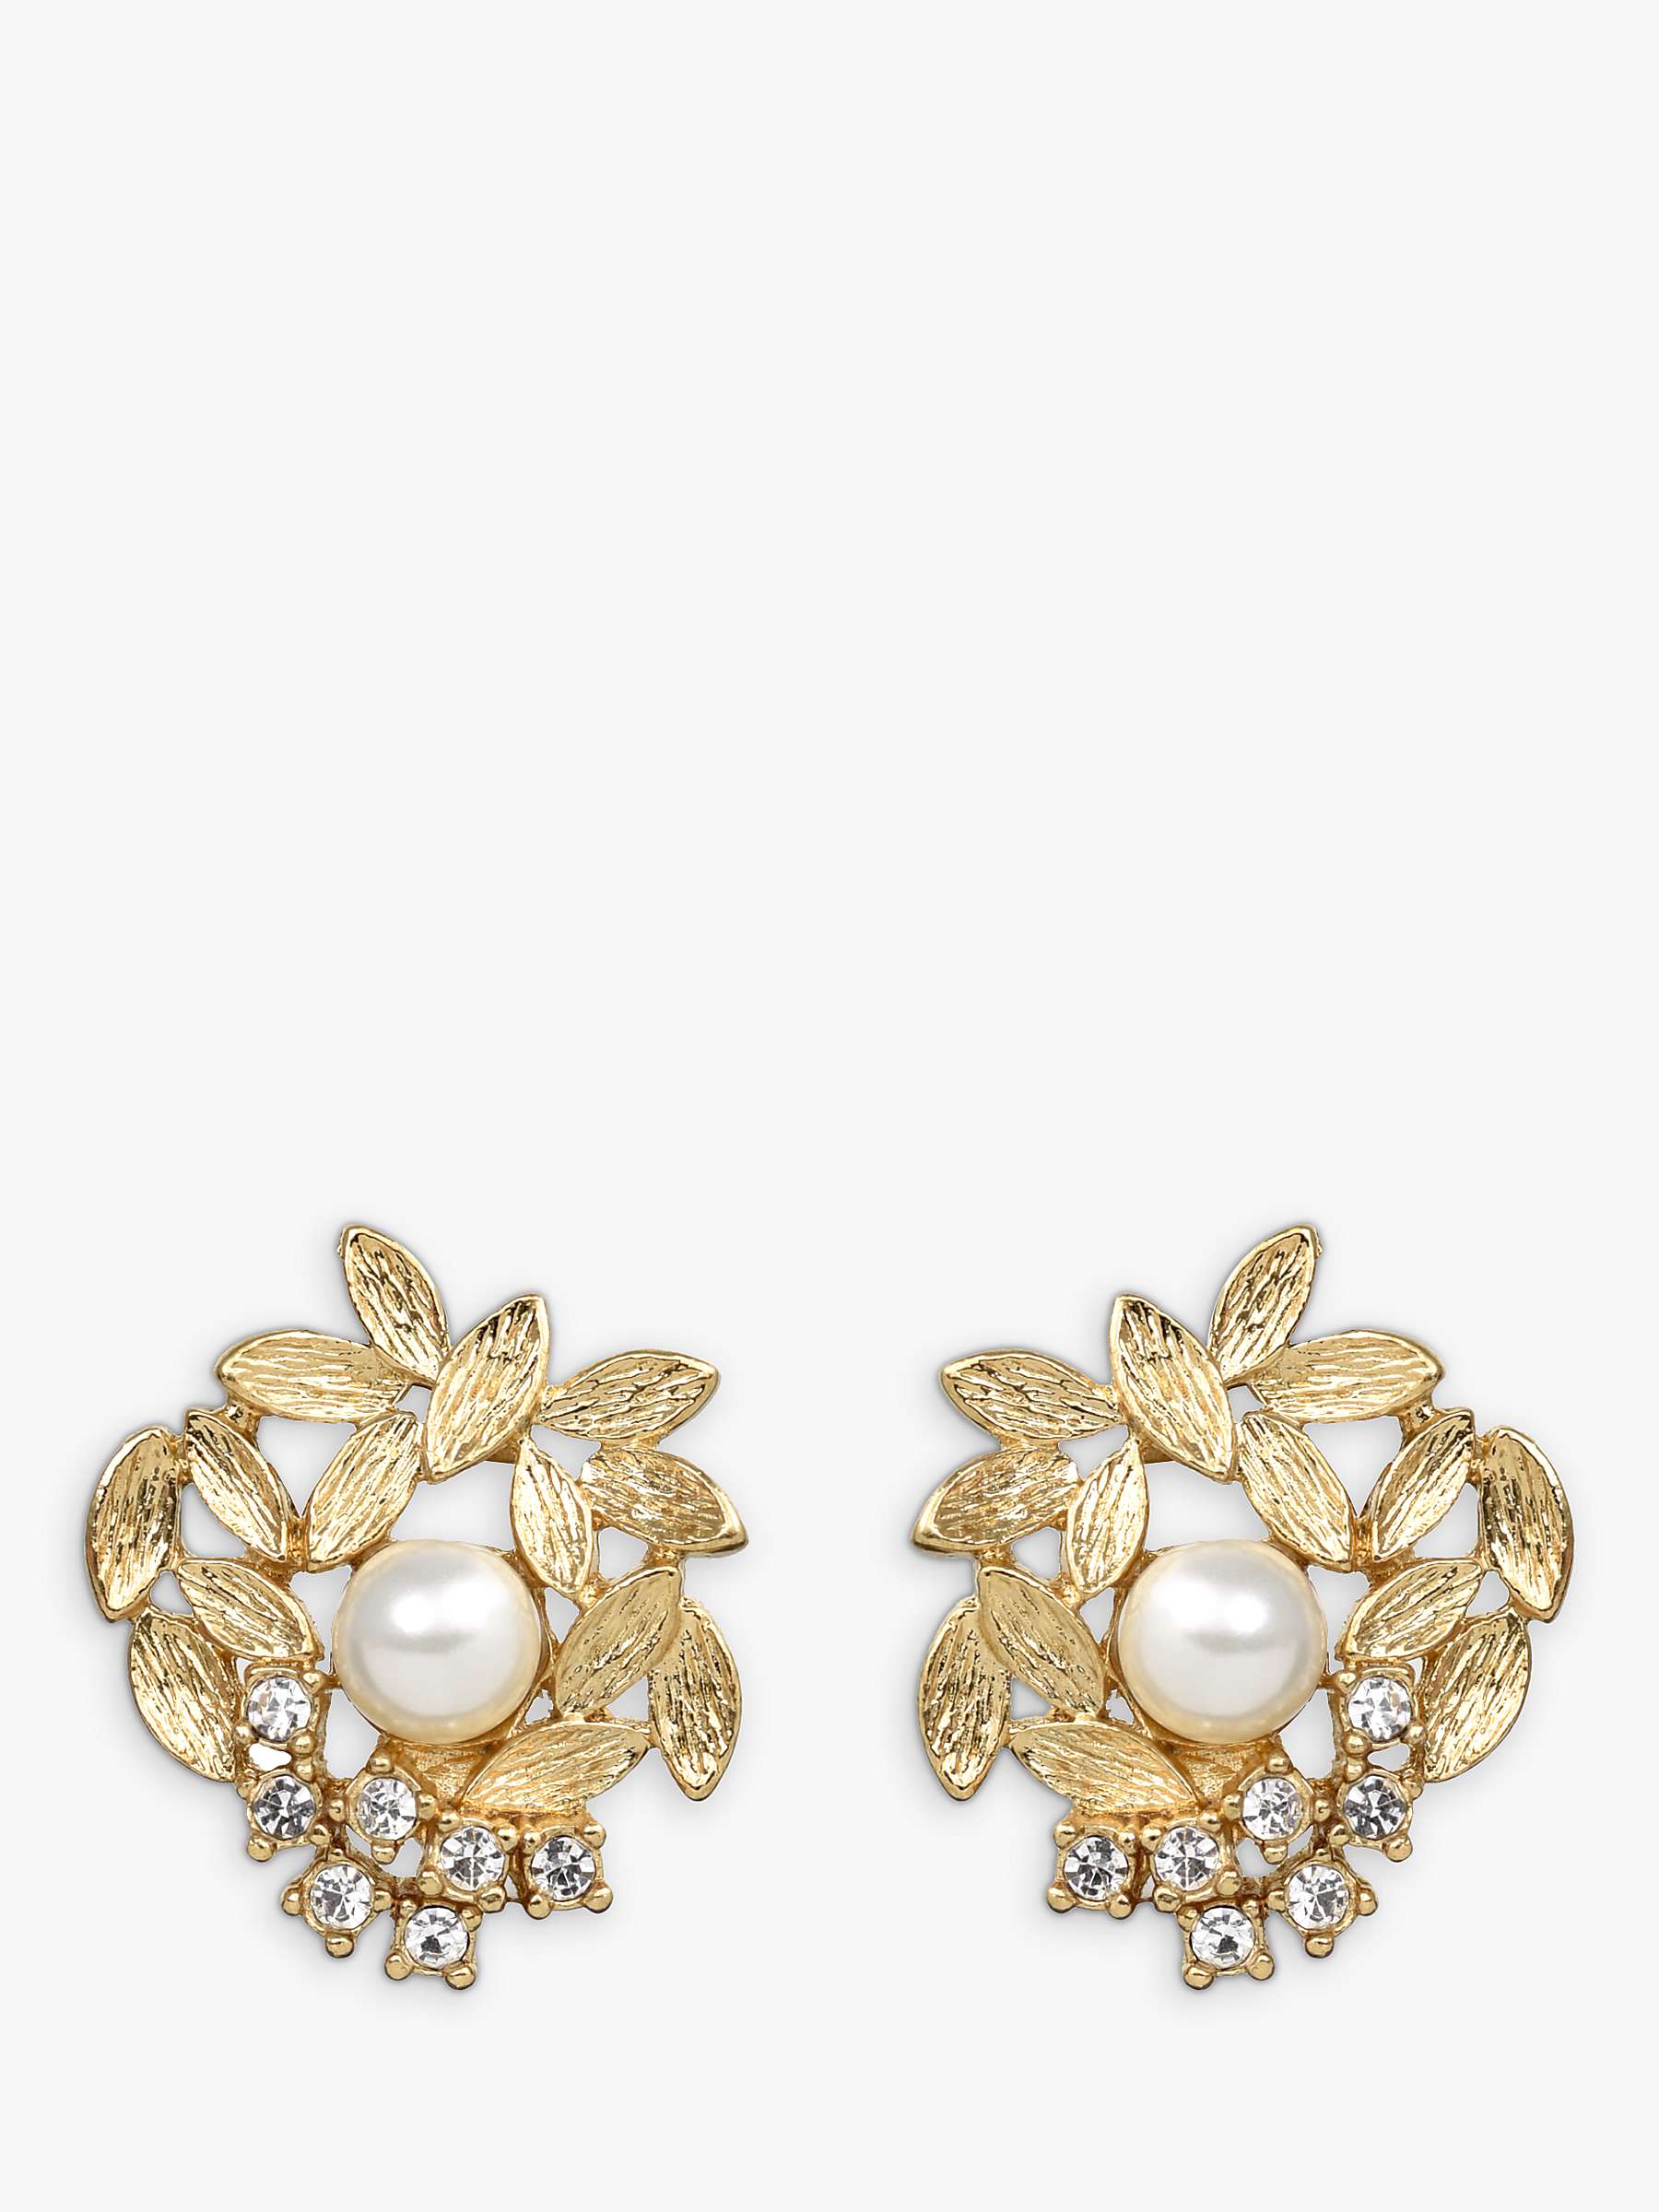 Buy Eclectica Vintage 18ct Gold Plated Faux Pearl Swarovski Crystal Clip-On Floral Earrings, Gold Online at johnlewis.com